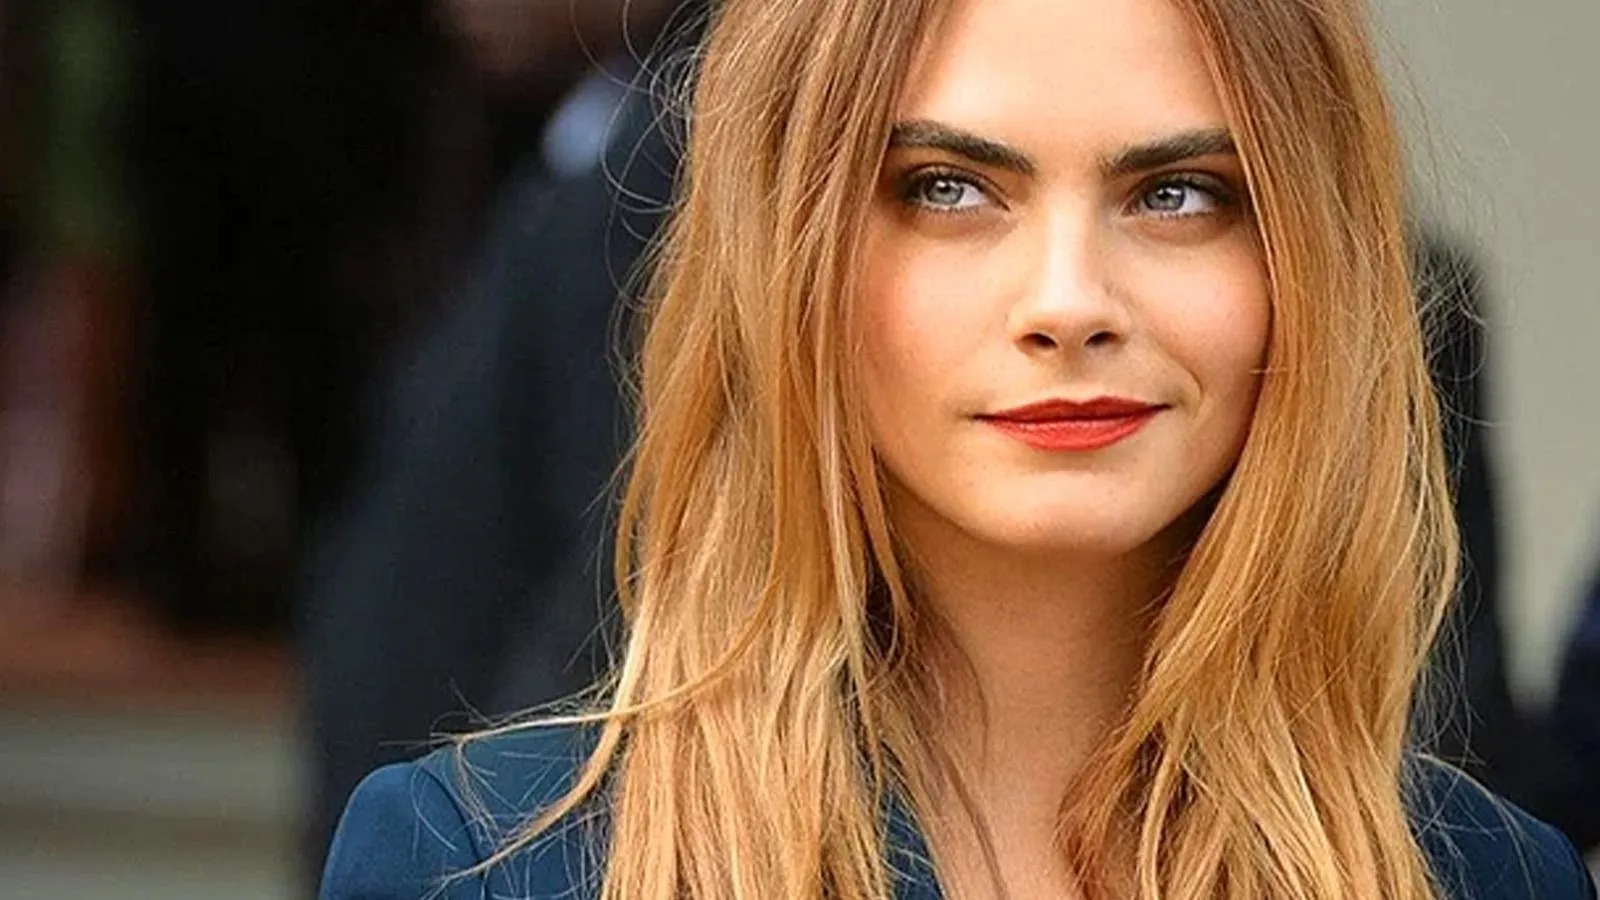 Only Murders in the Building Season 2 Cast - Cara Delevingne as Alice